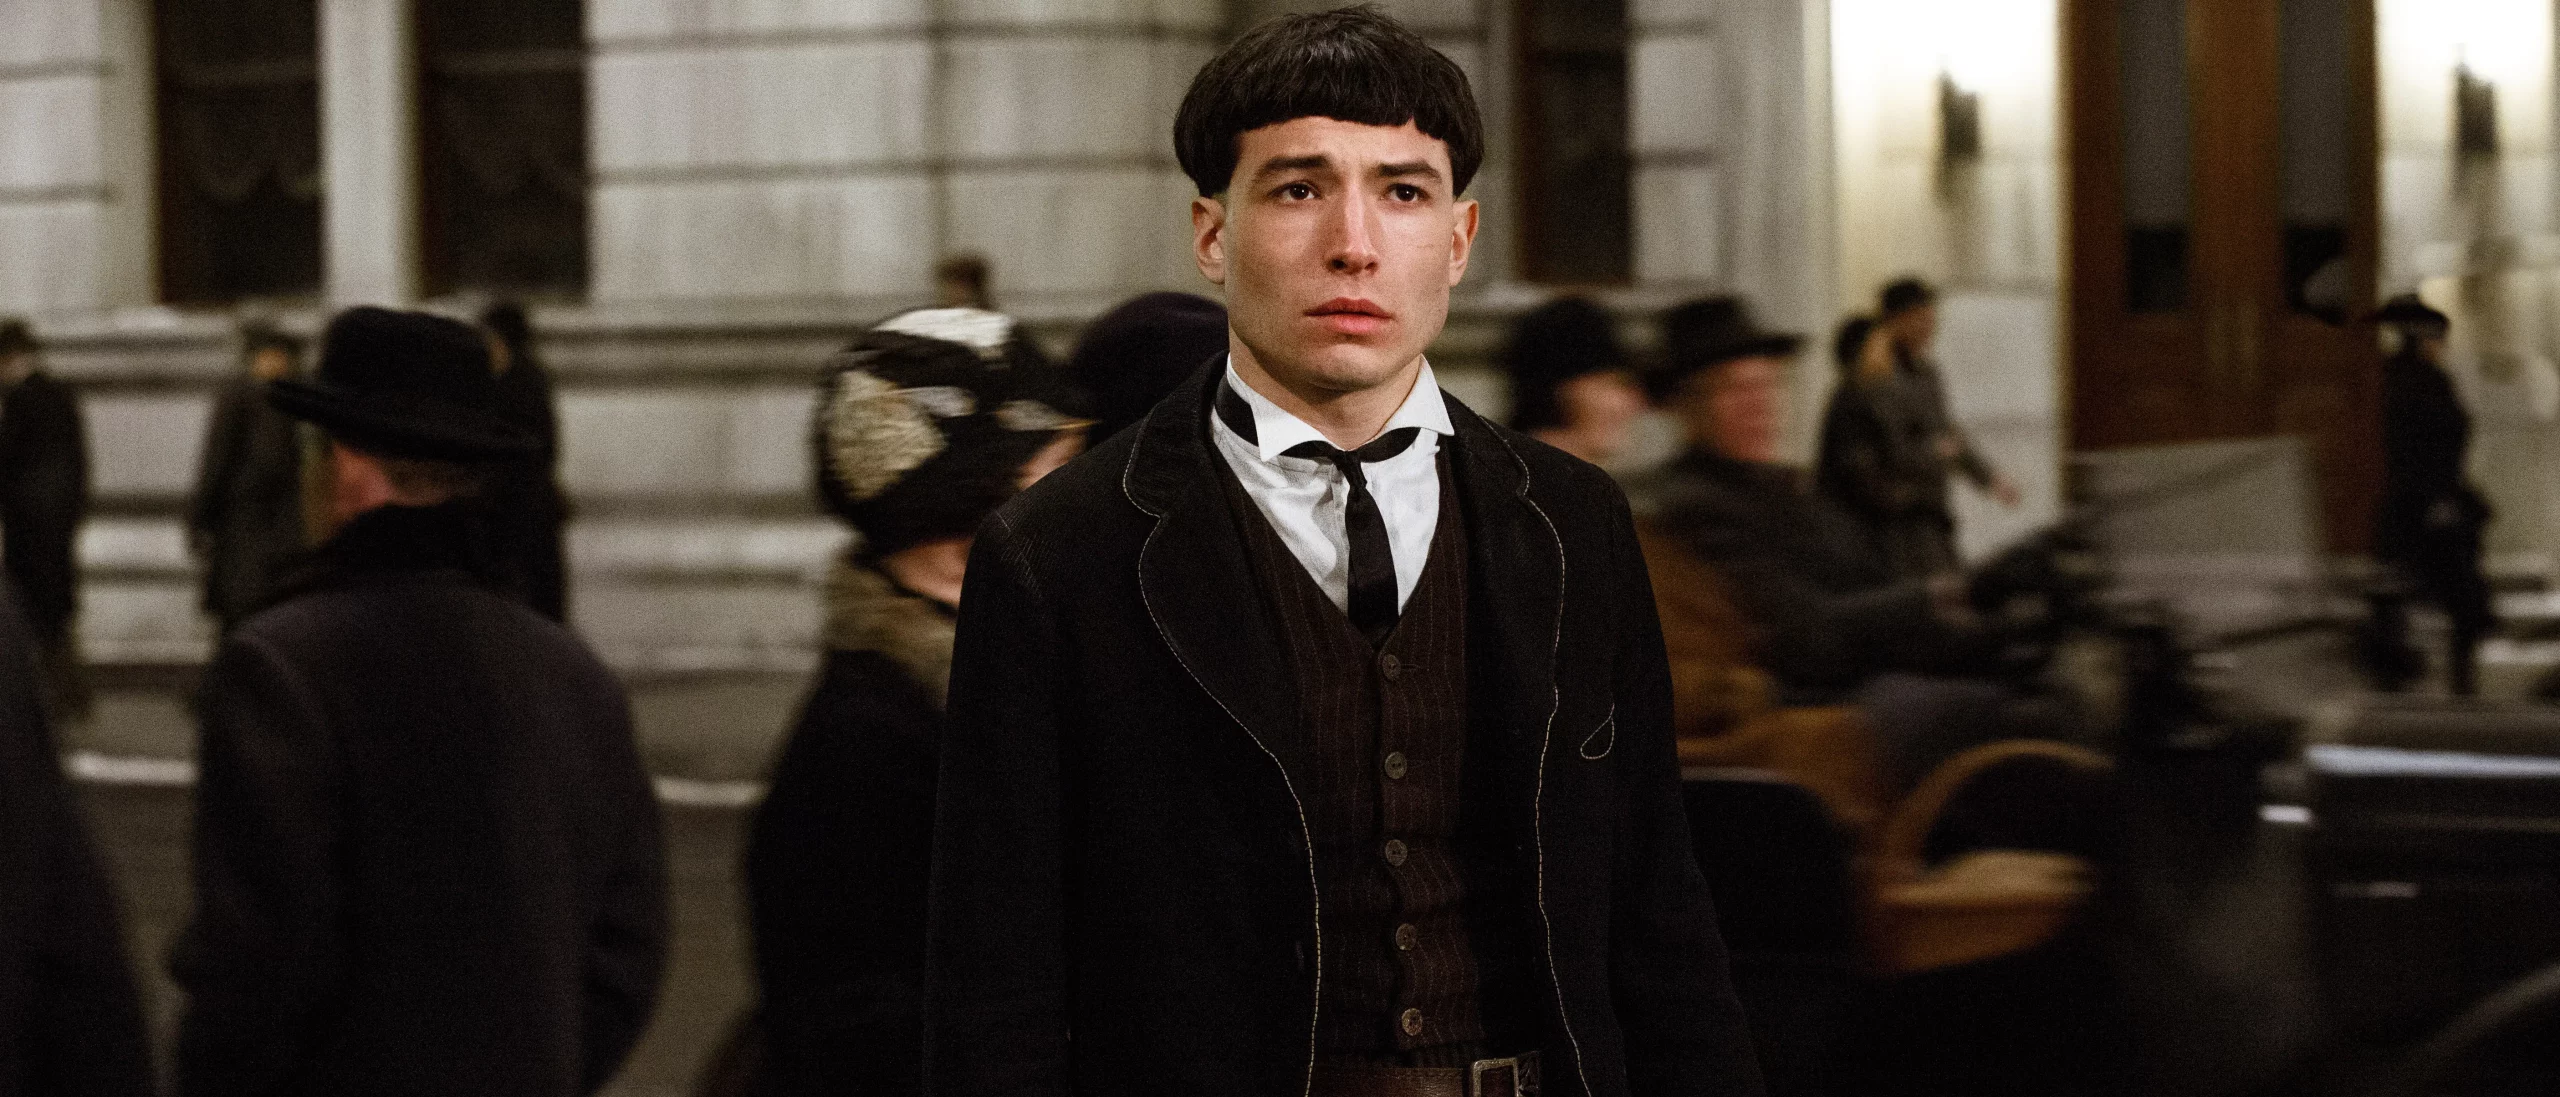 Ezra Miller as Credence in Fantastic Beasts and Where to Find Them (2016).